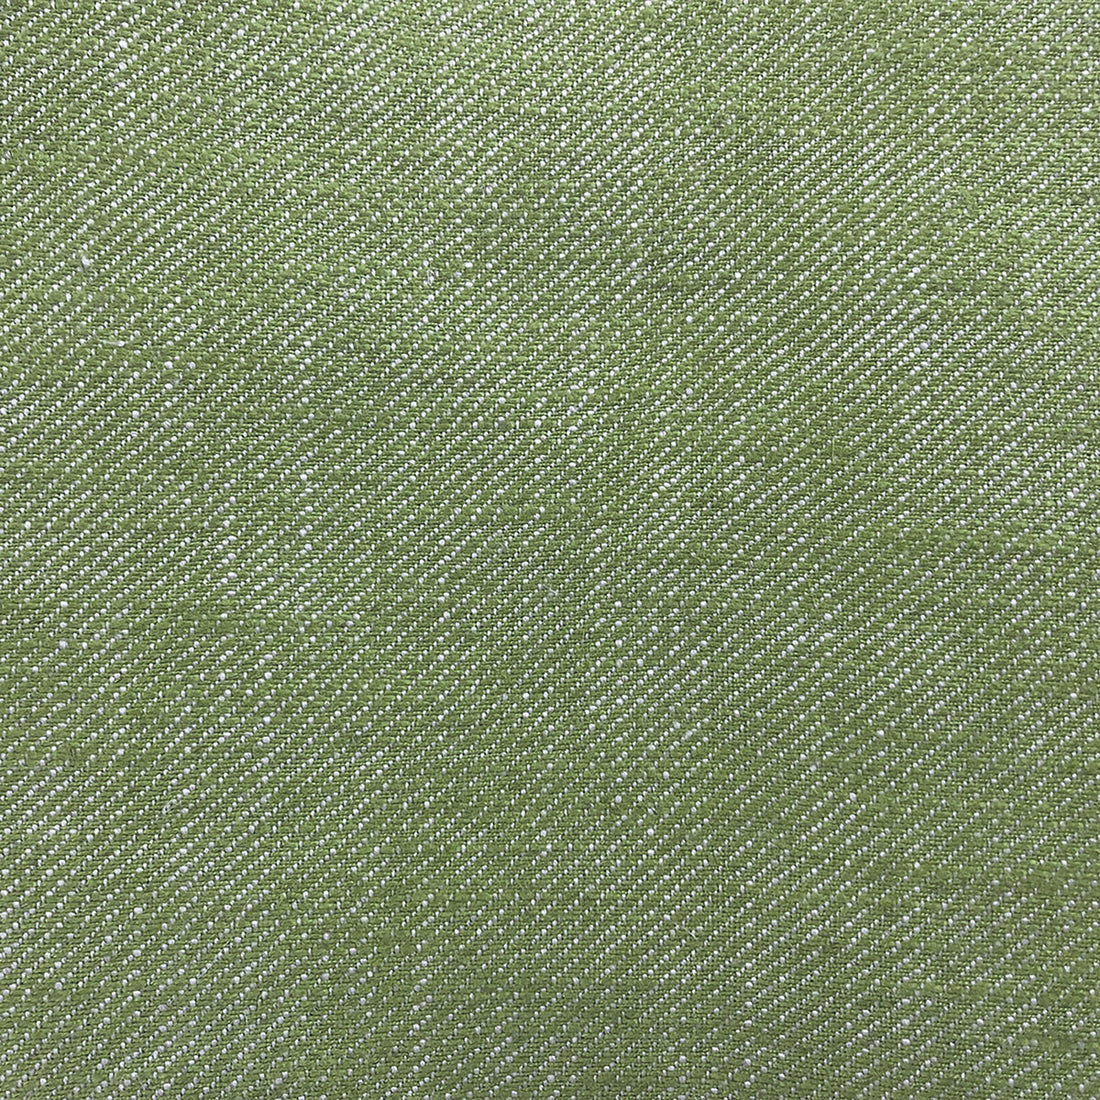 Hisa fabric in verde agua color - pattern GDT5639.020.0 - by Gaston y Daniela in the Gaston Japon collection